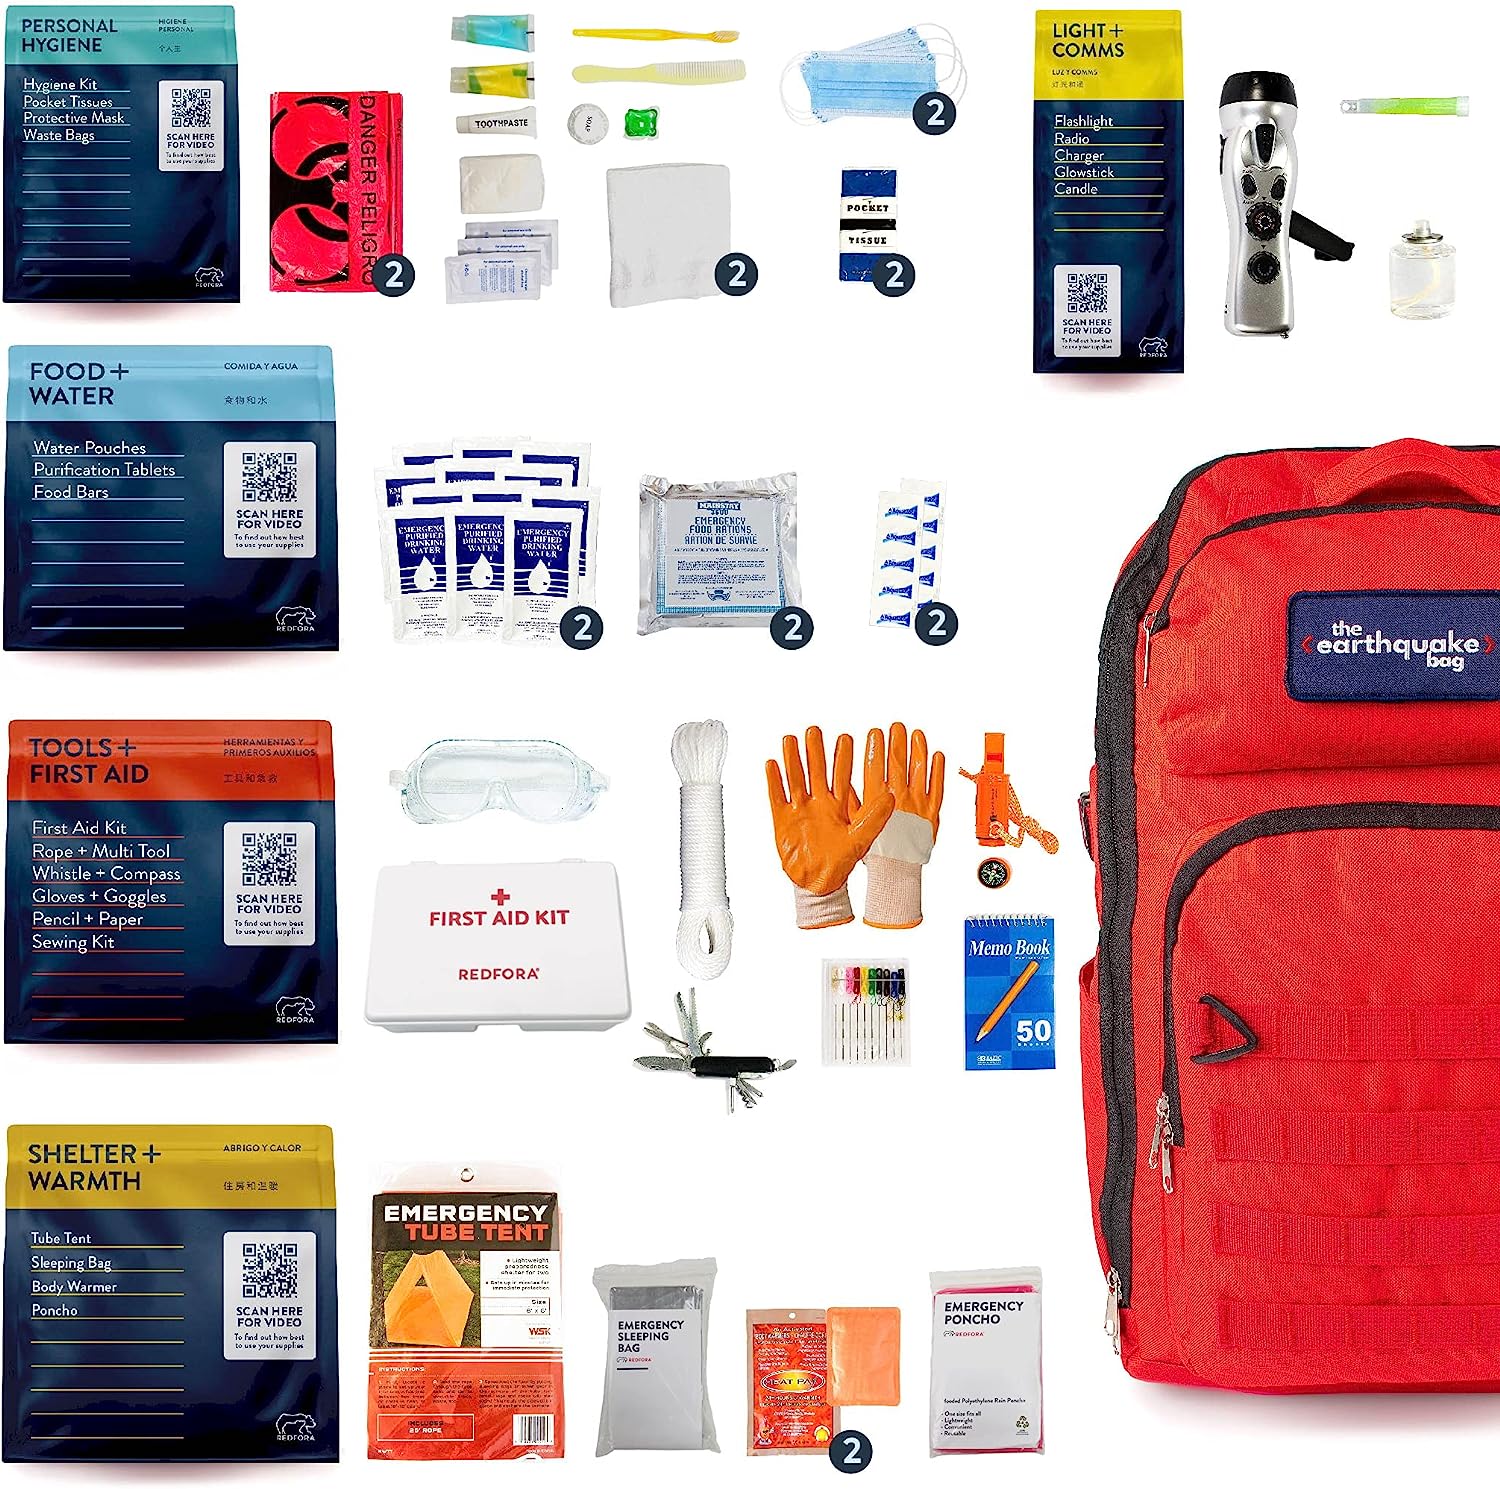 Complete Earthquake Bag - 3 Day Emergency kit for [...]